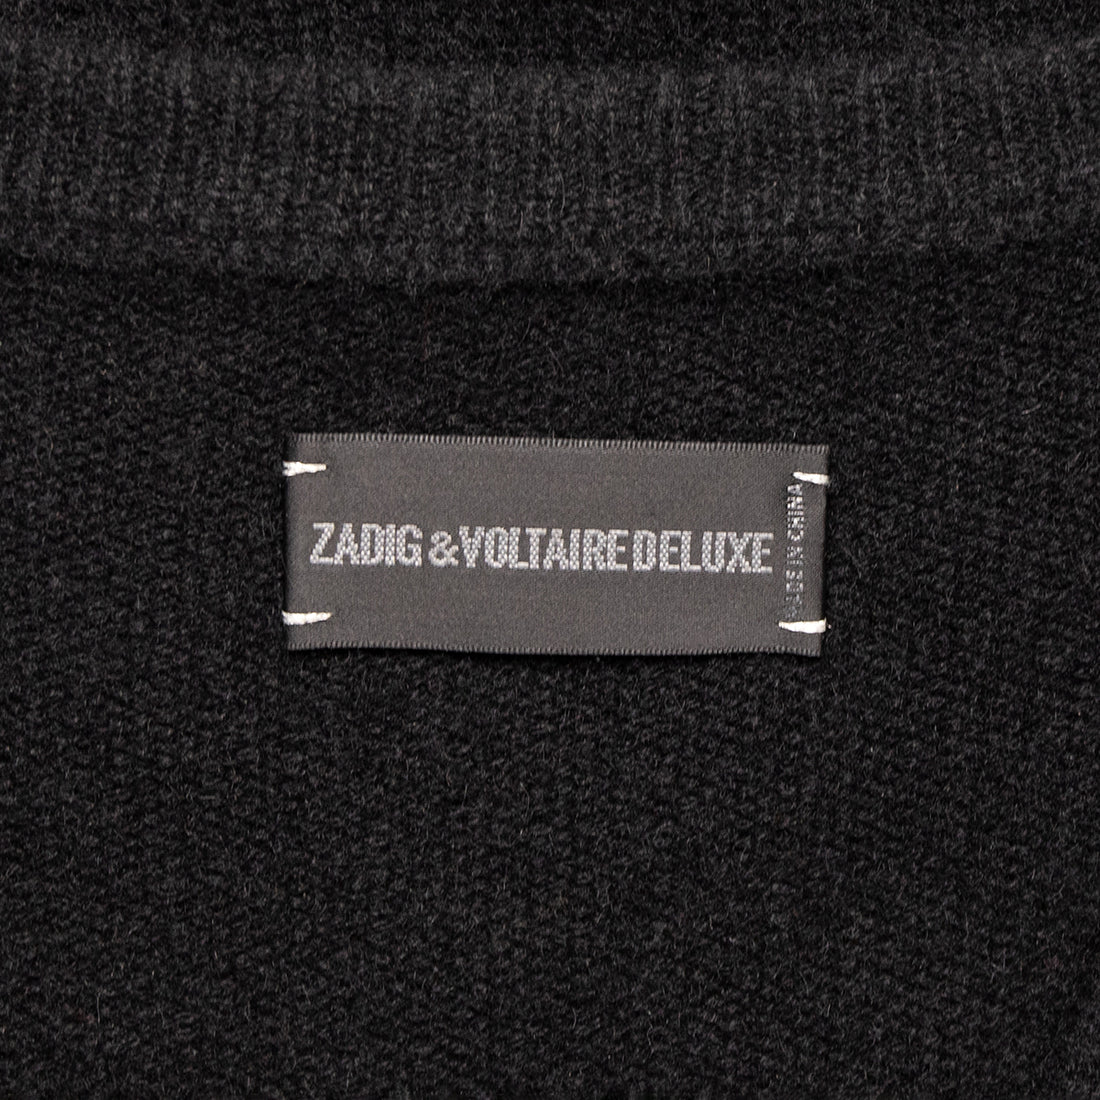 Zadig &amp; Voltaire cashmere sweater with fringe details